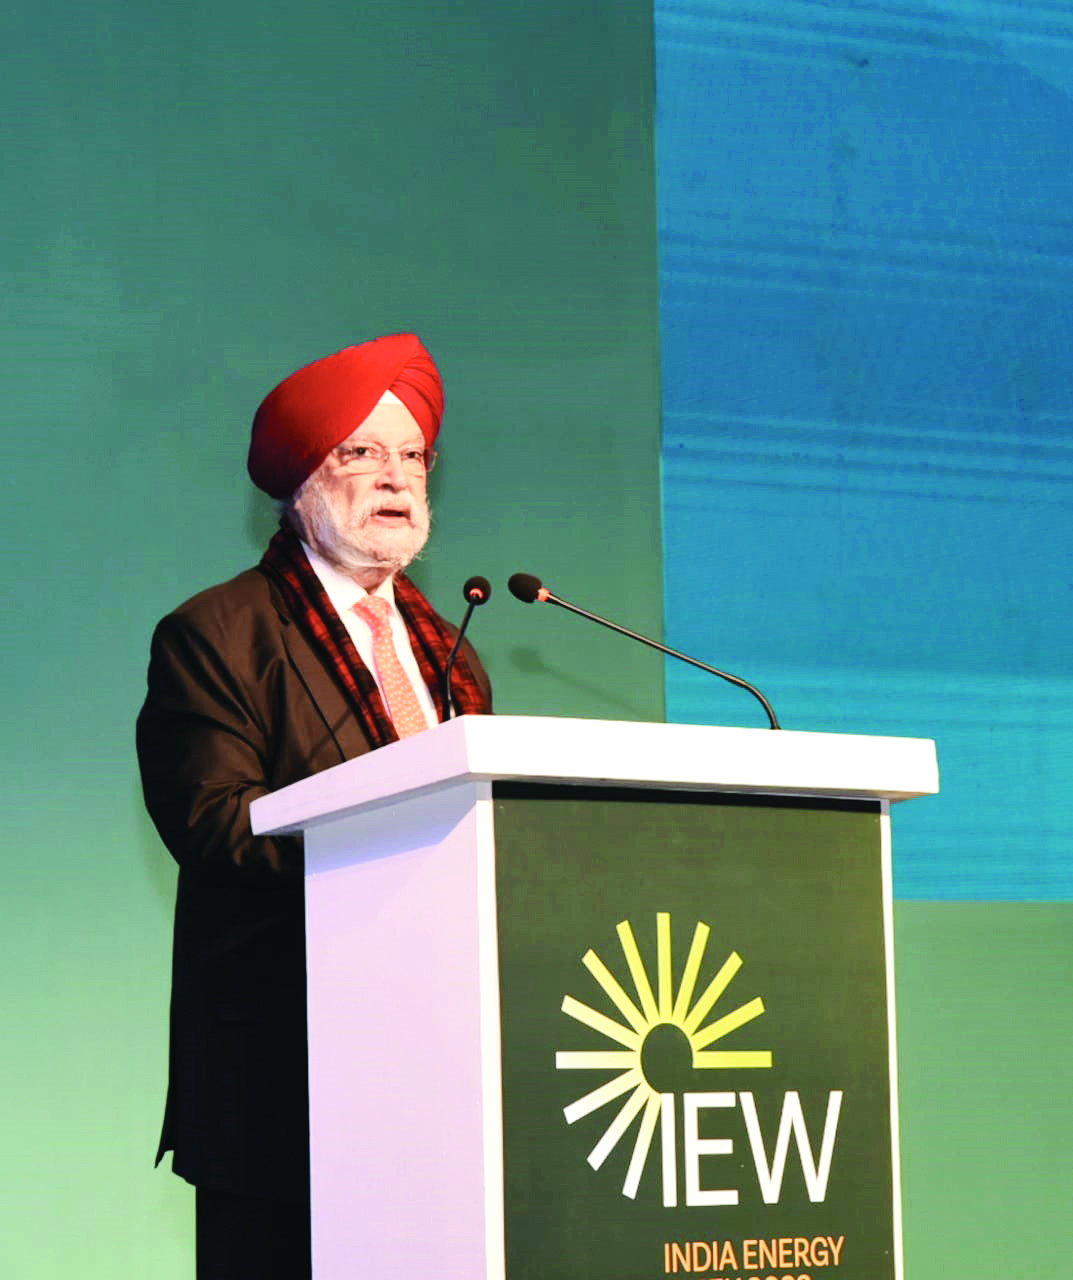 India’s energy transition path involve a variety of solutions to support economic growth: Puri